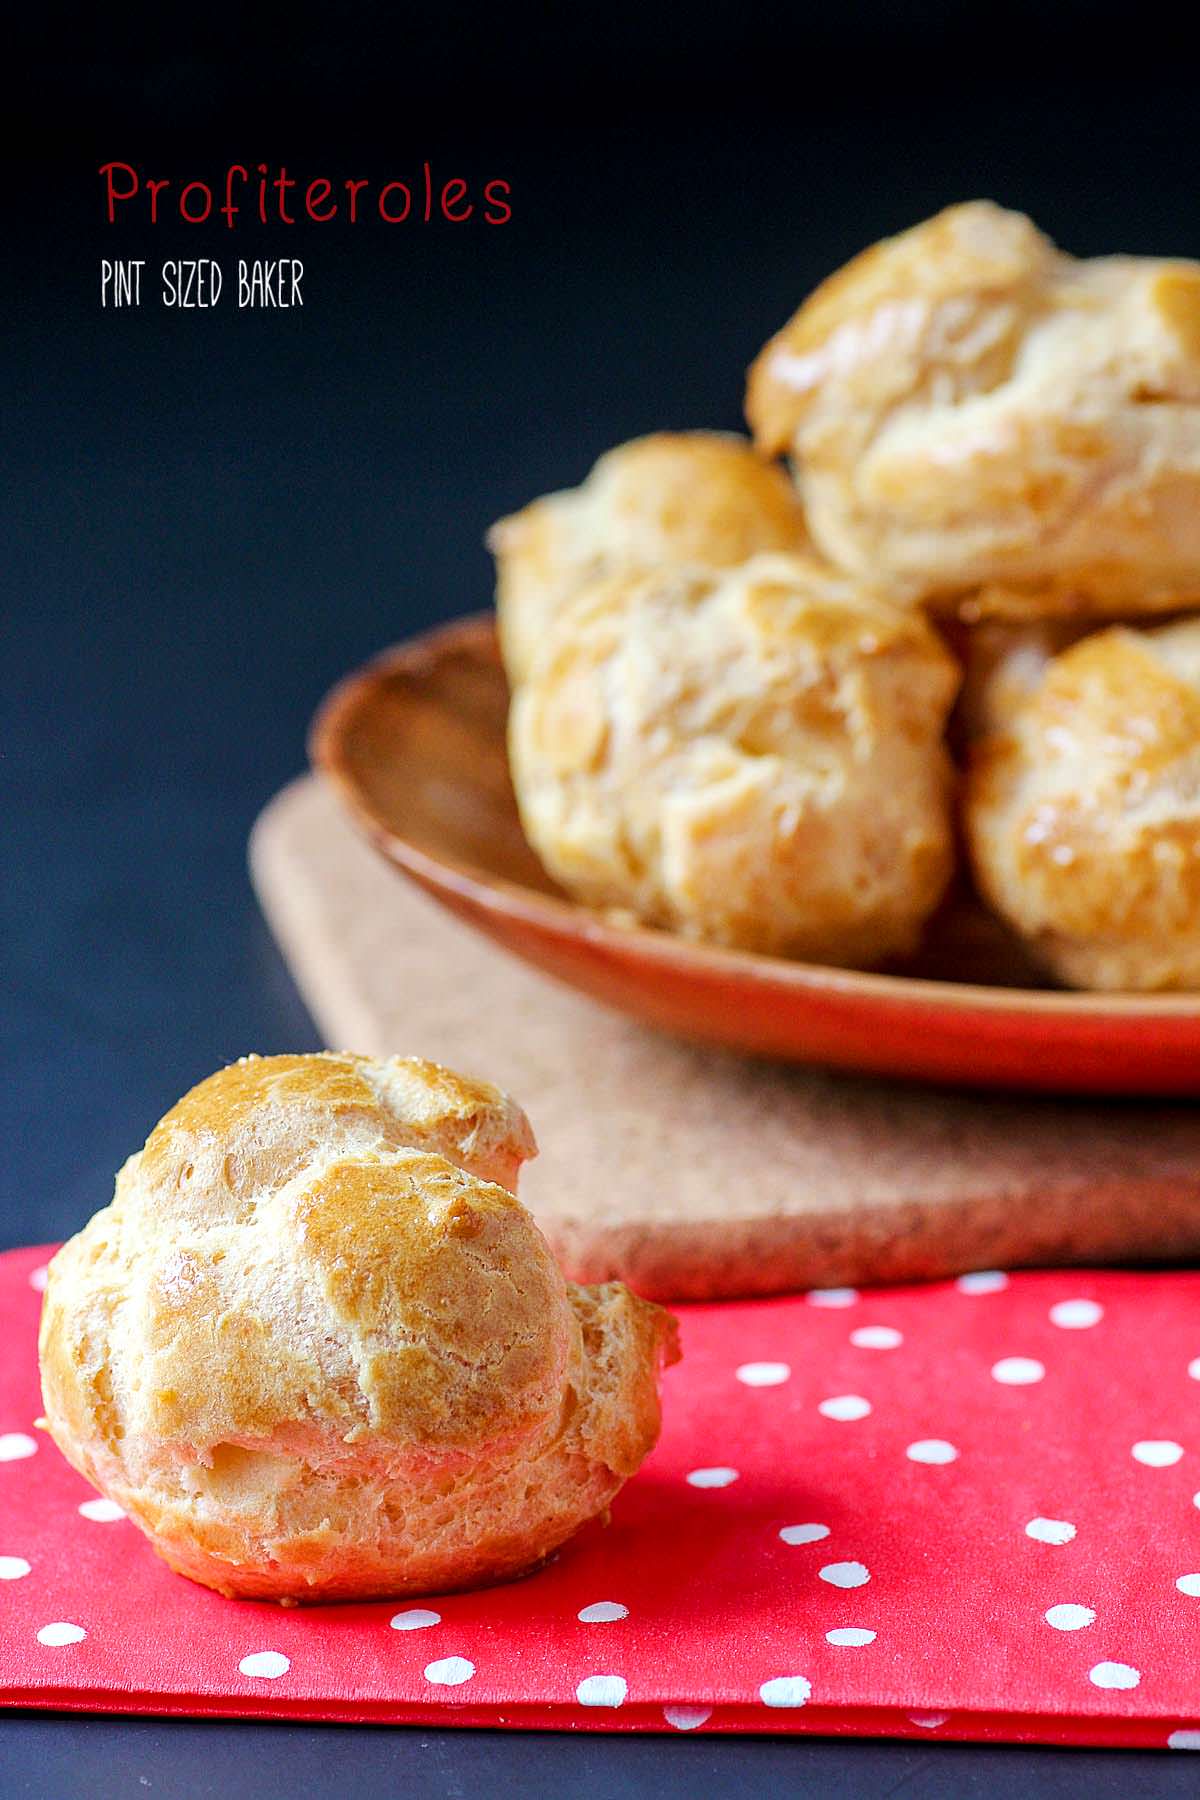 Making homemade cream puffs is easy. Don't let the French name 